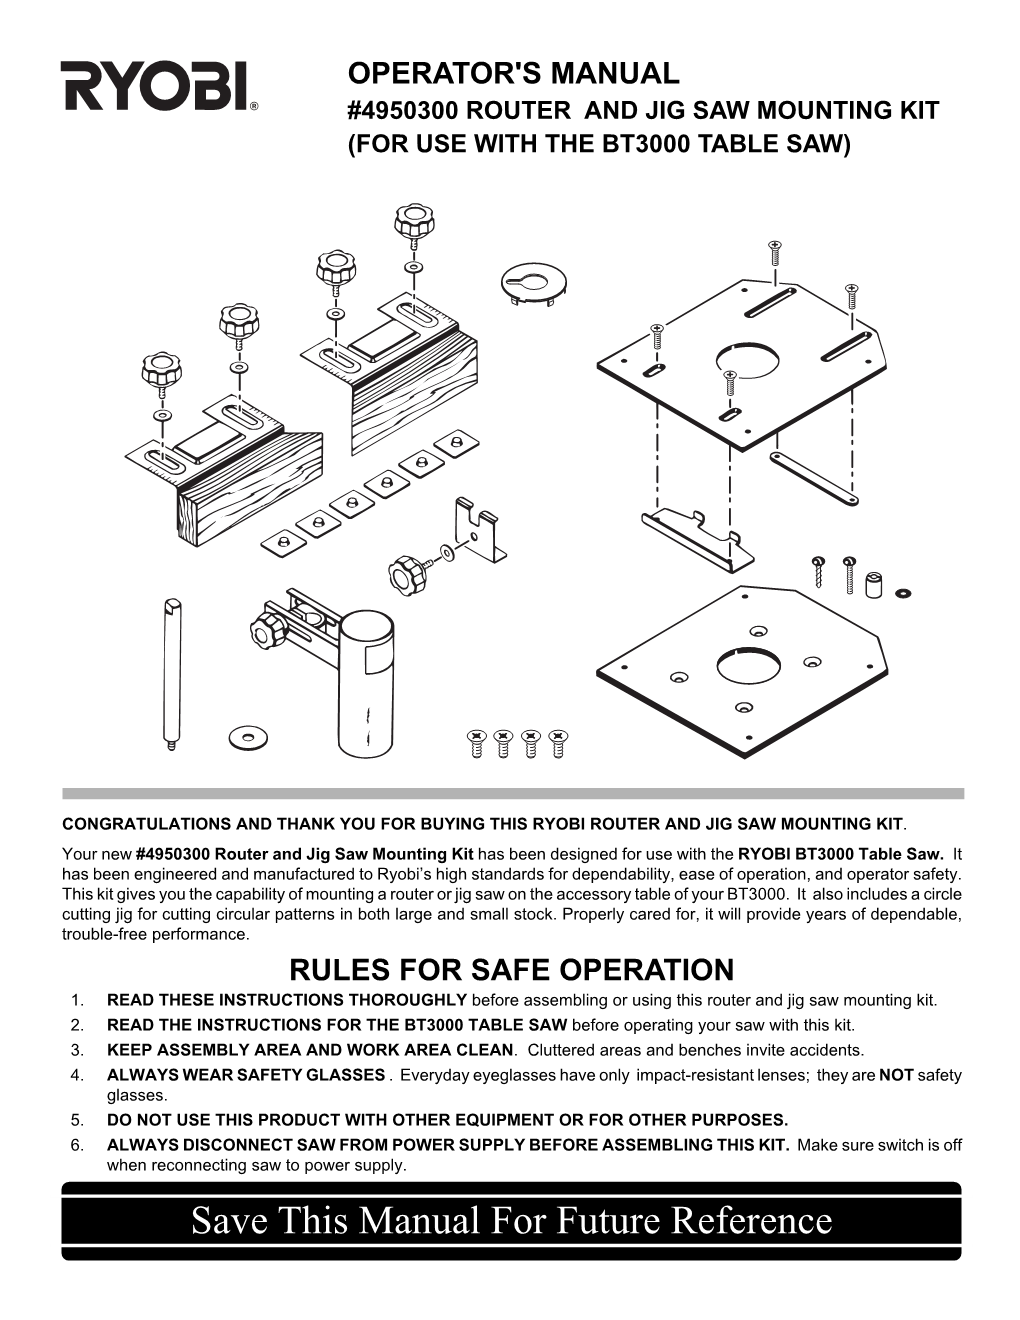 Save This Manual for Future Reference RULES for SAFE OPERATION (Continued)